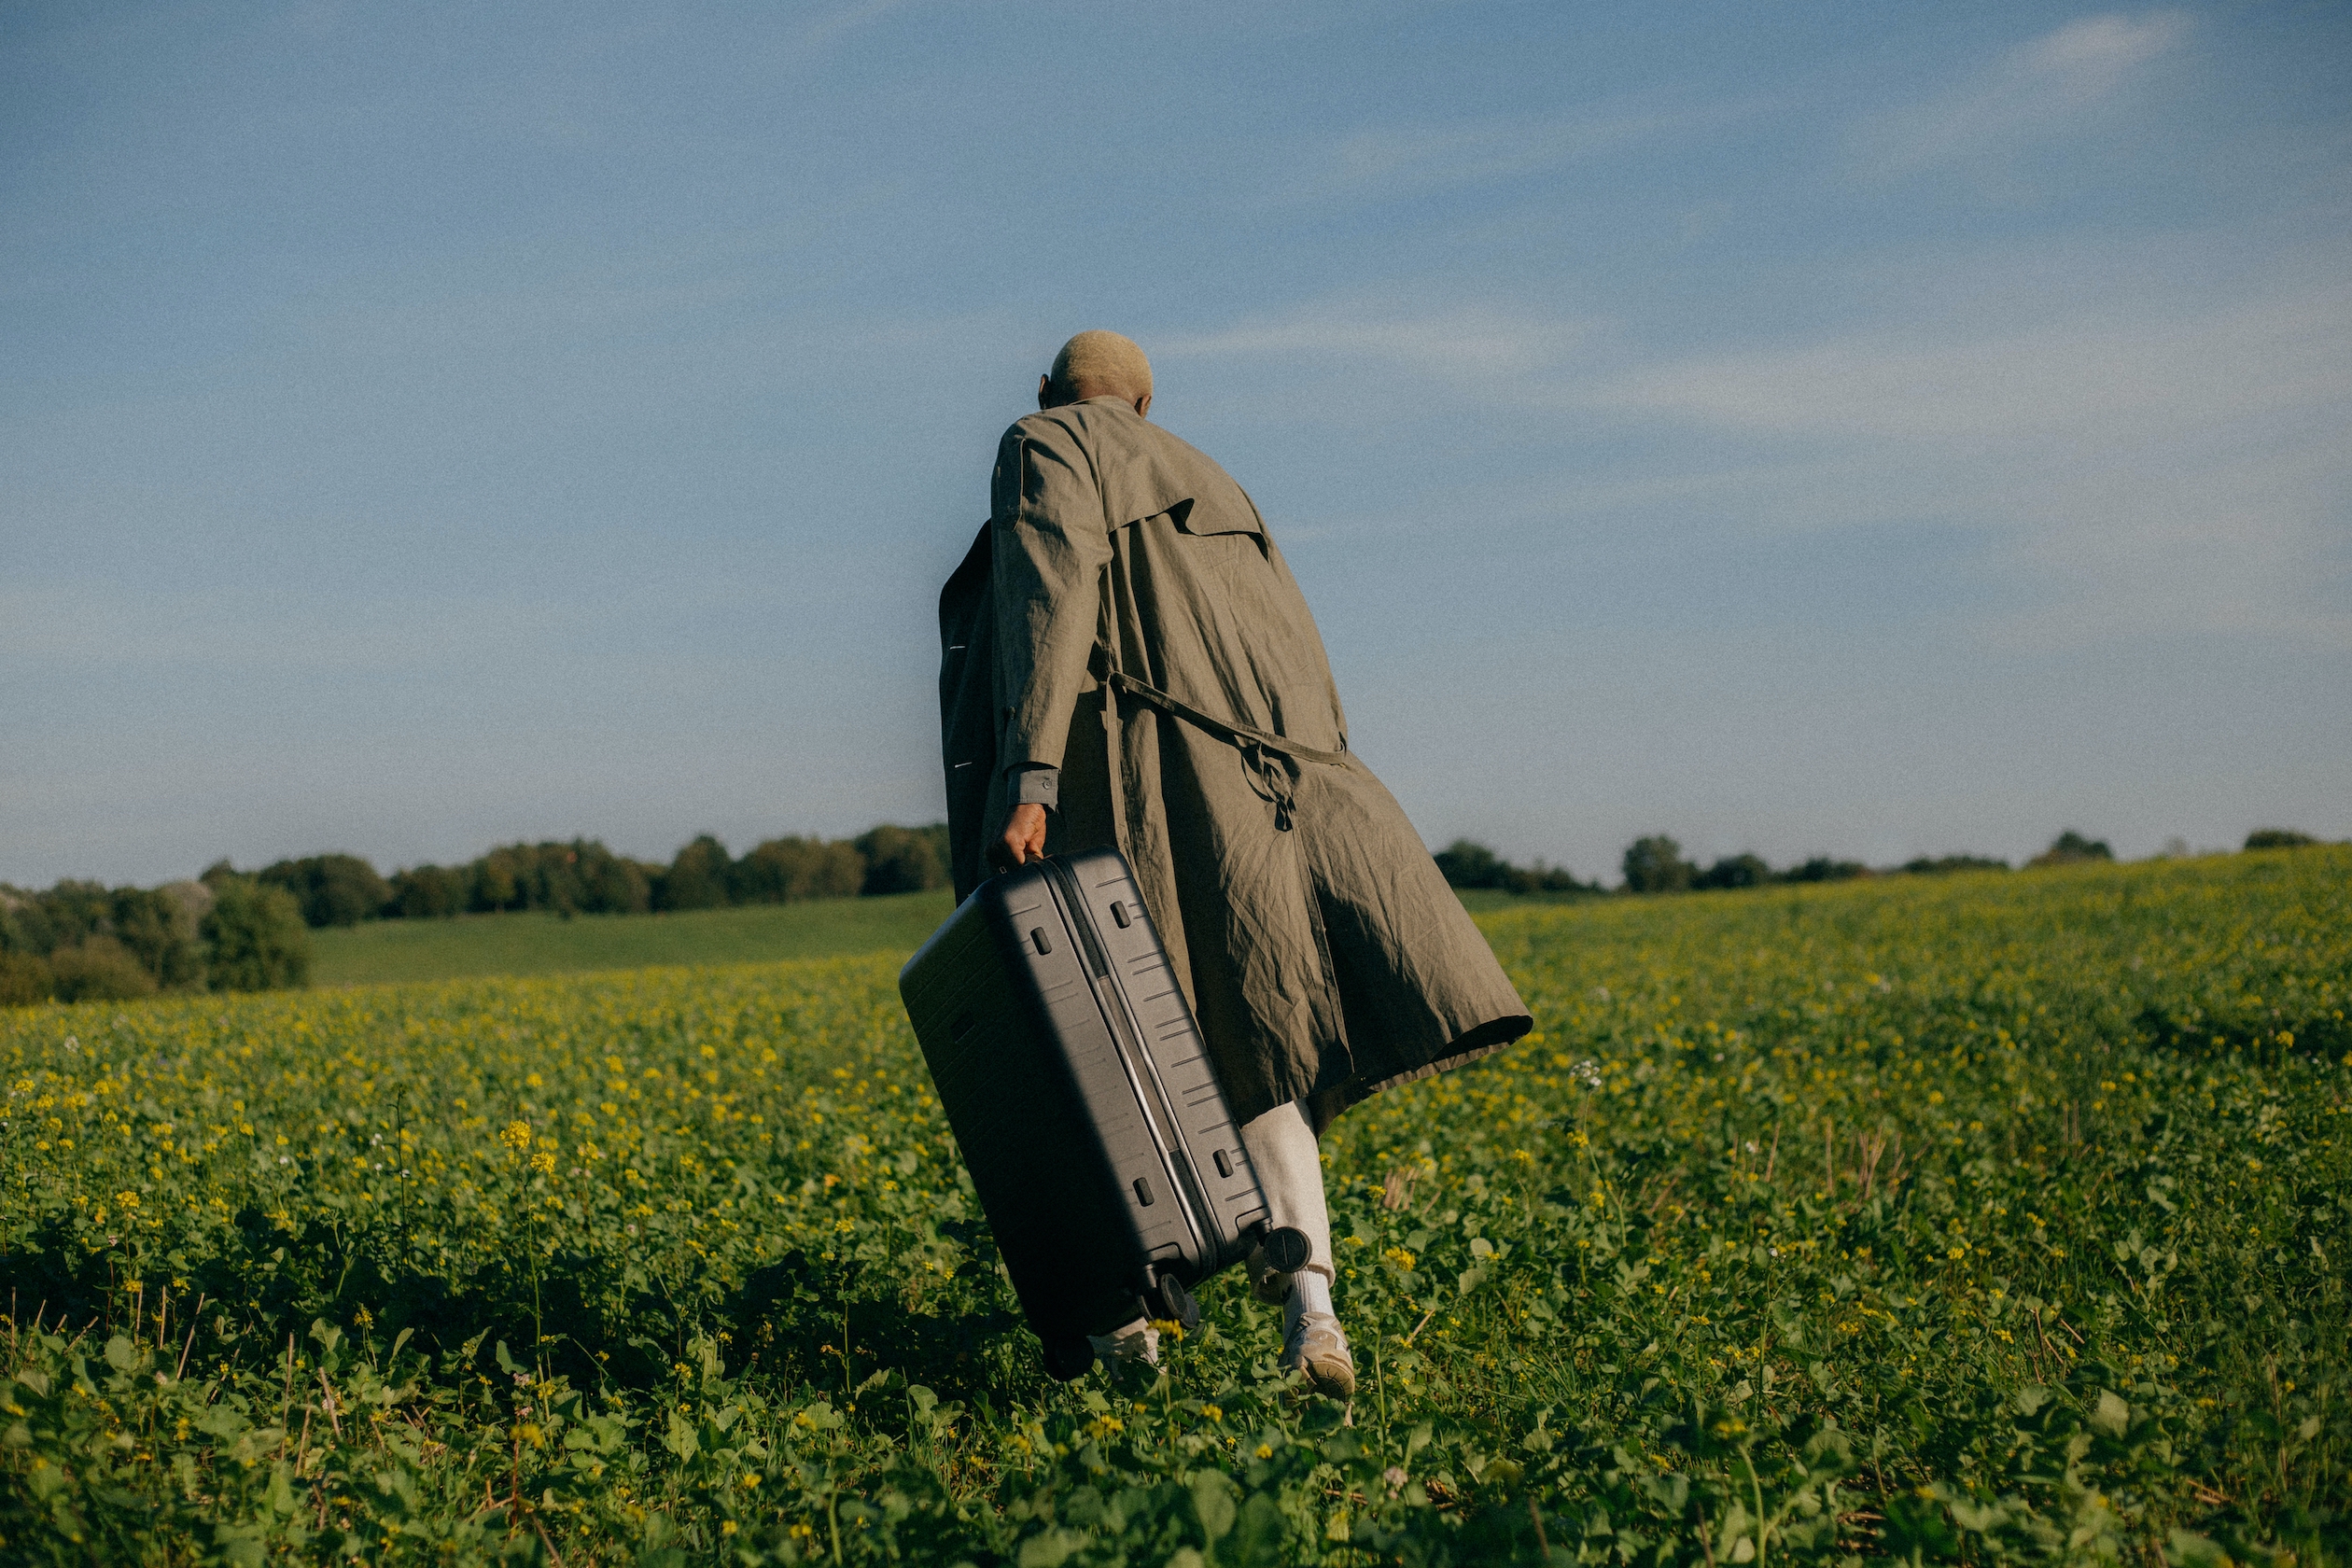 Photo of a person walking through a lush open field wearing a trench coat and carrying a suitcase.